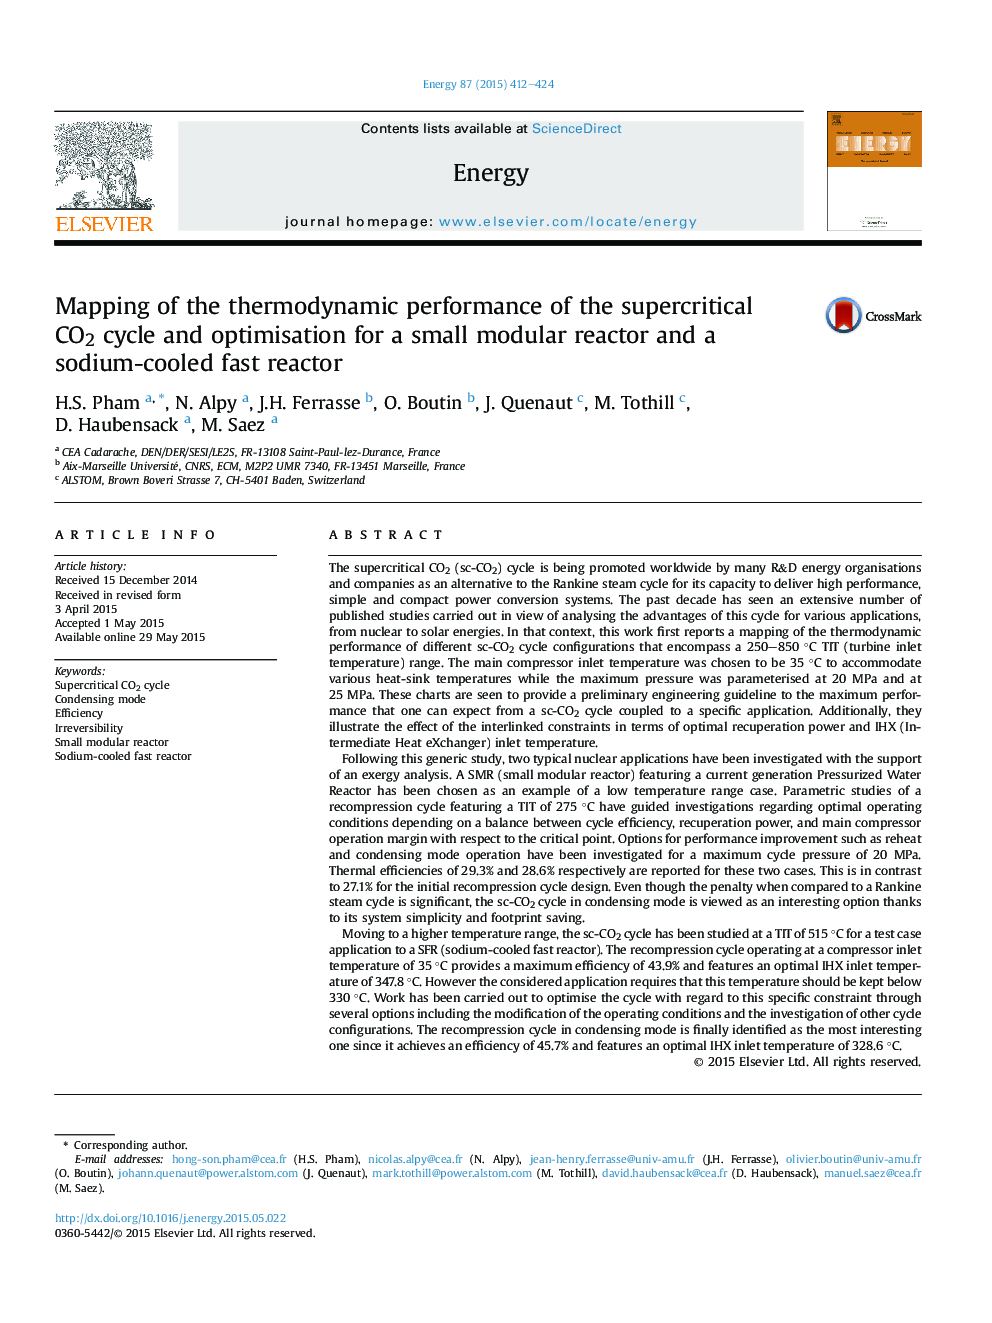 Mapping of the thermodynamic performance of the supercritical CO2 cycle and optimisation for a small modular reactor and a sodium-cooled fast reactor